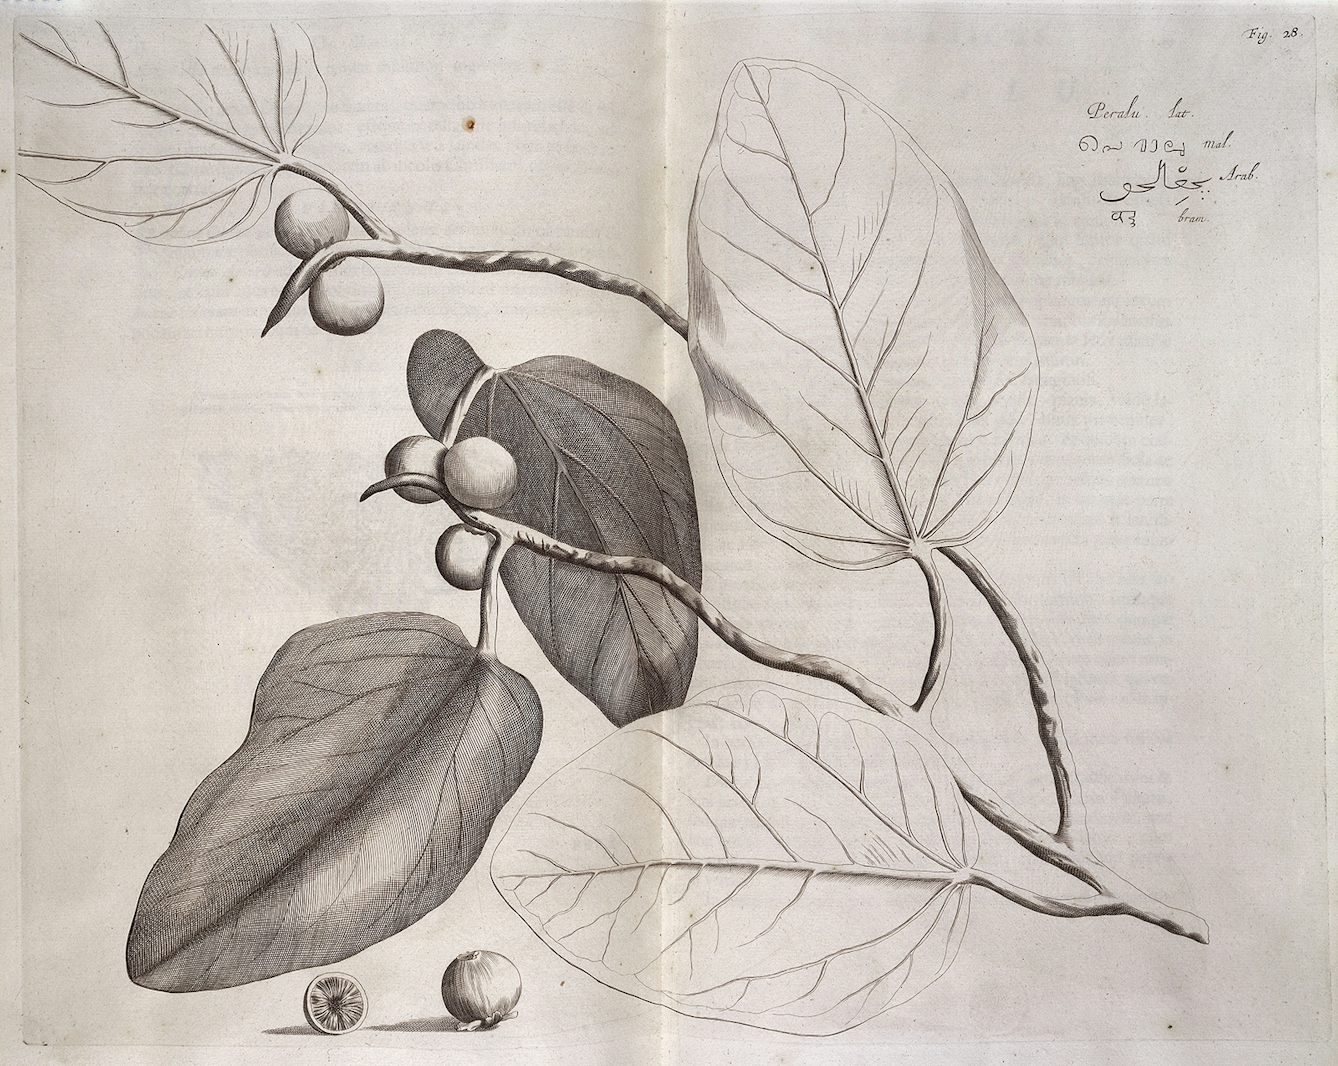 A black and white engraving of a branch with leaves and fruit.